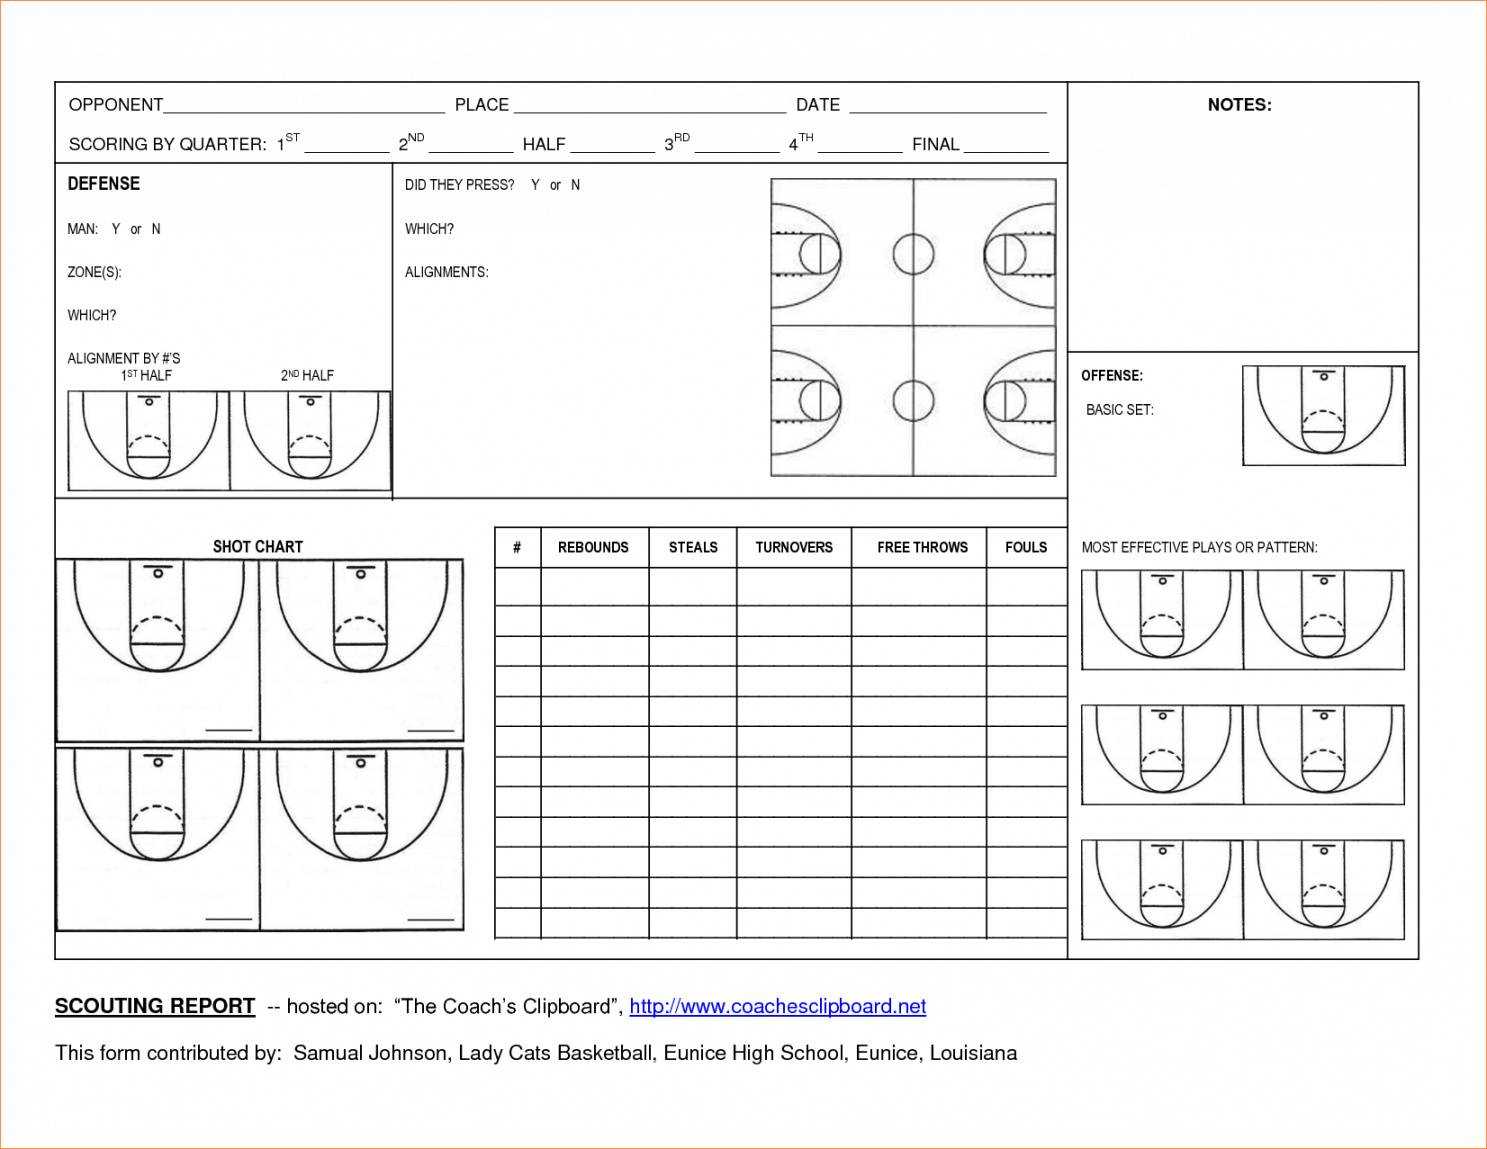 Editable Basketball Scouting Report Template Dltemplates Regarding Basketball Scouting Report Template